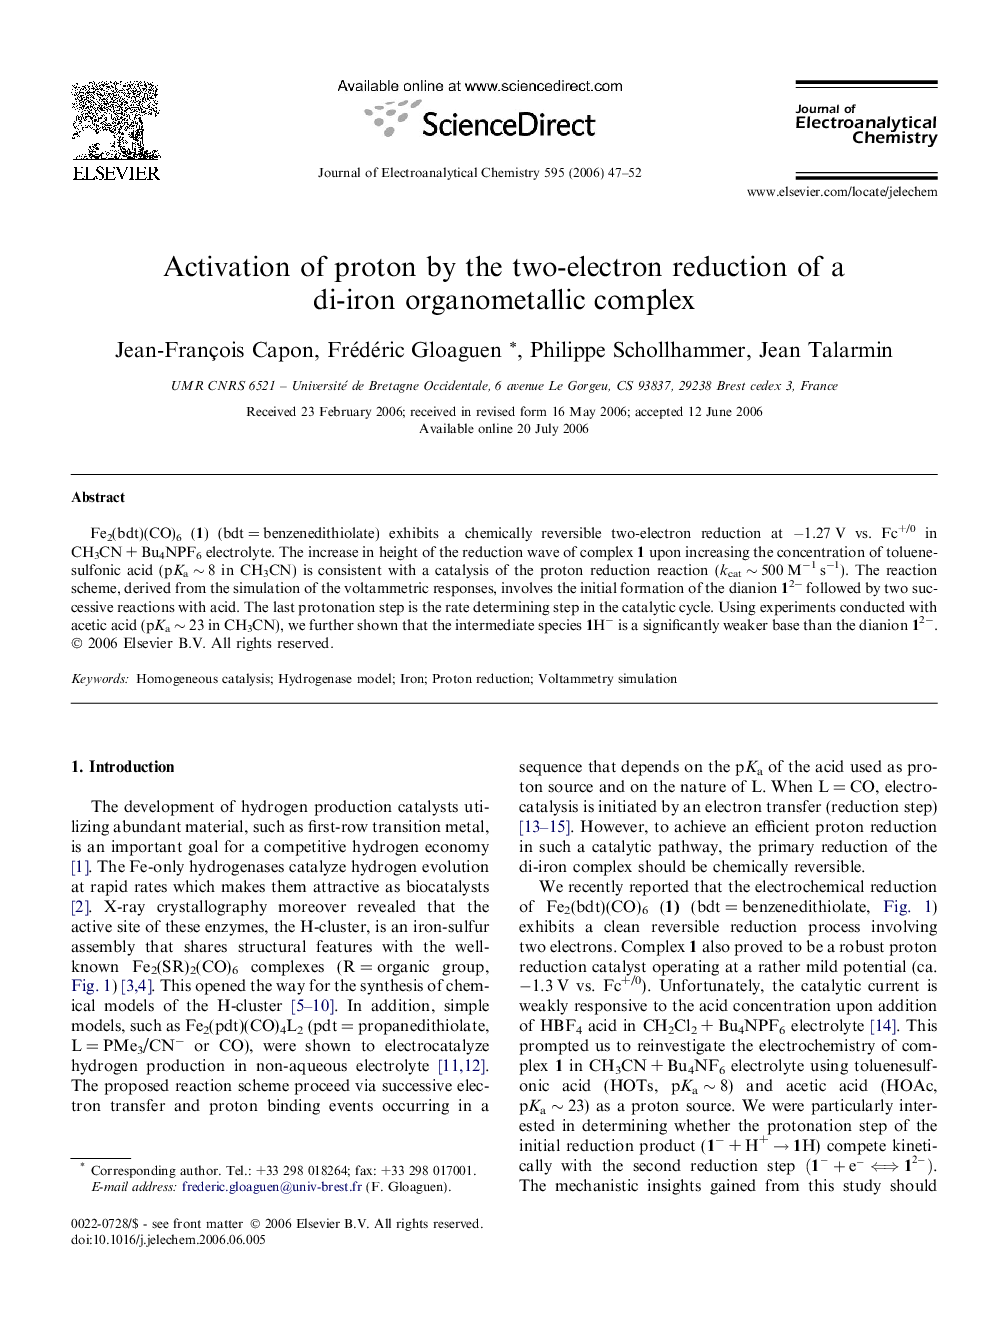 Activation of proton by the two-electron reduction of a di-iron organometallic complex